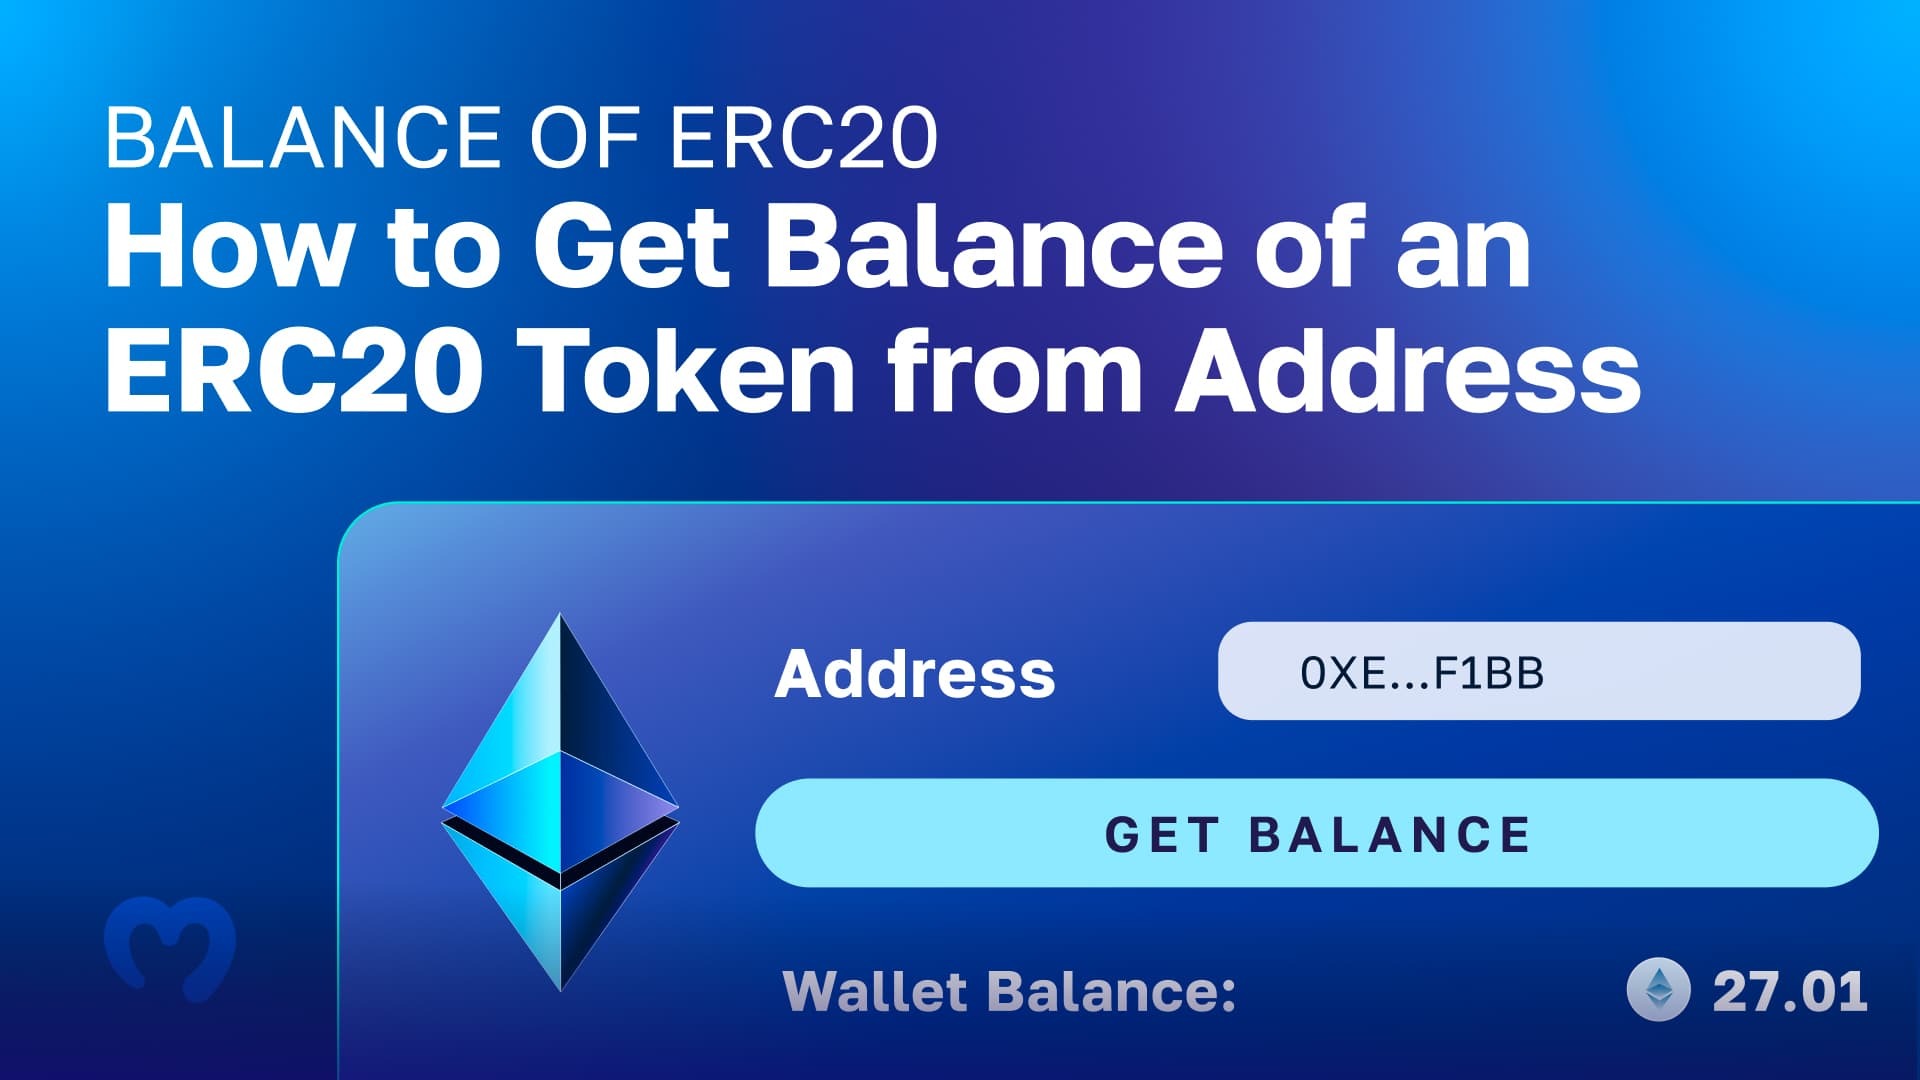 Exploring how to get the balance of ERC20 tokens from an address.